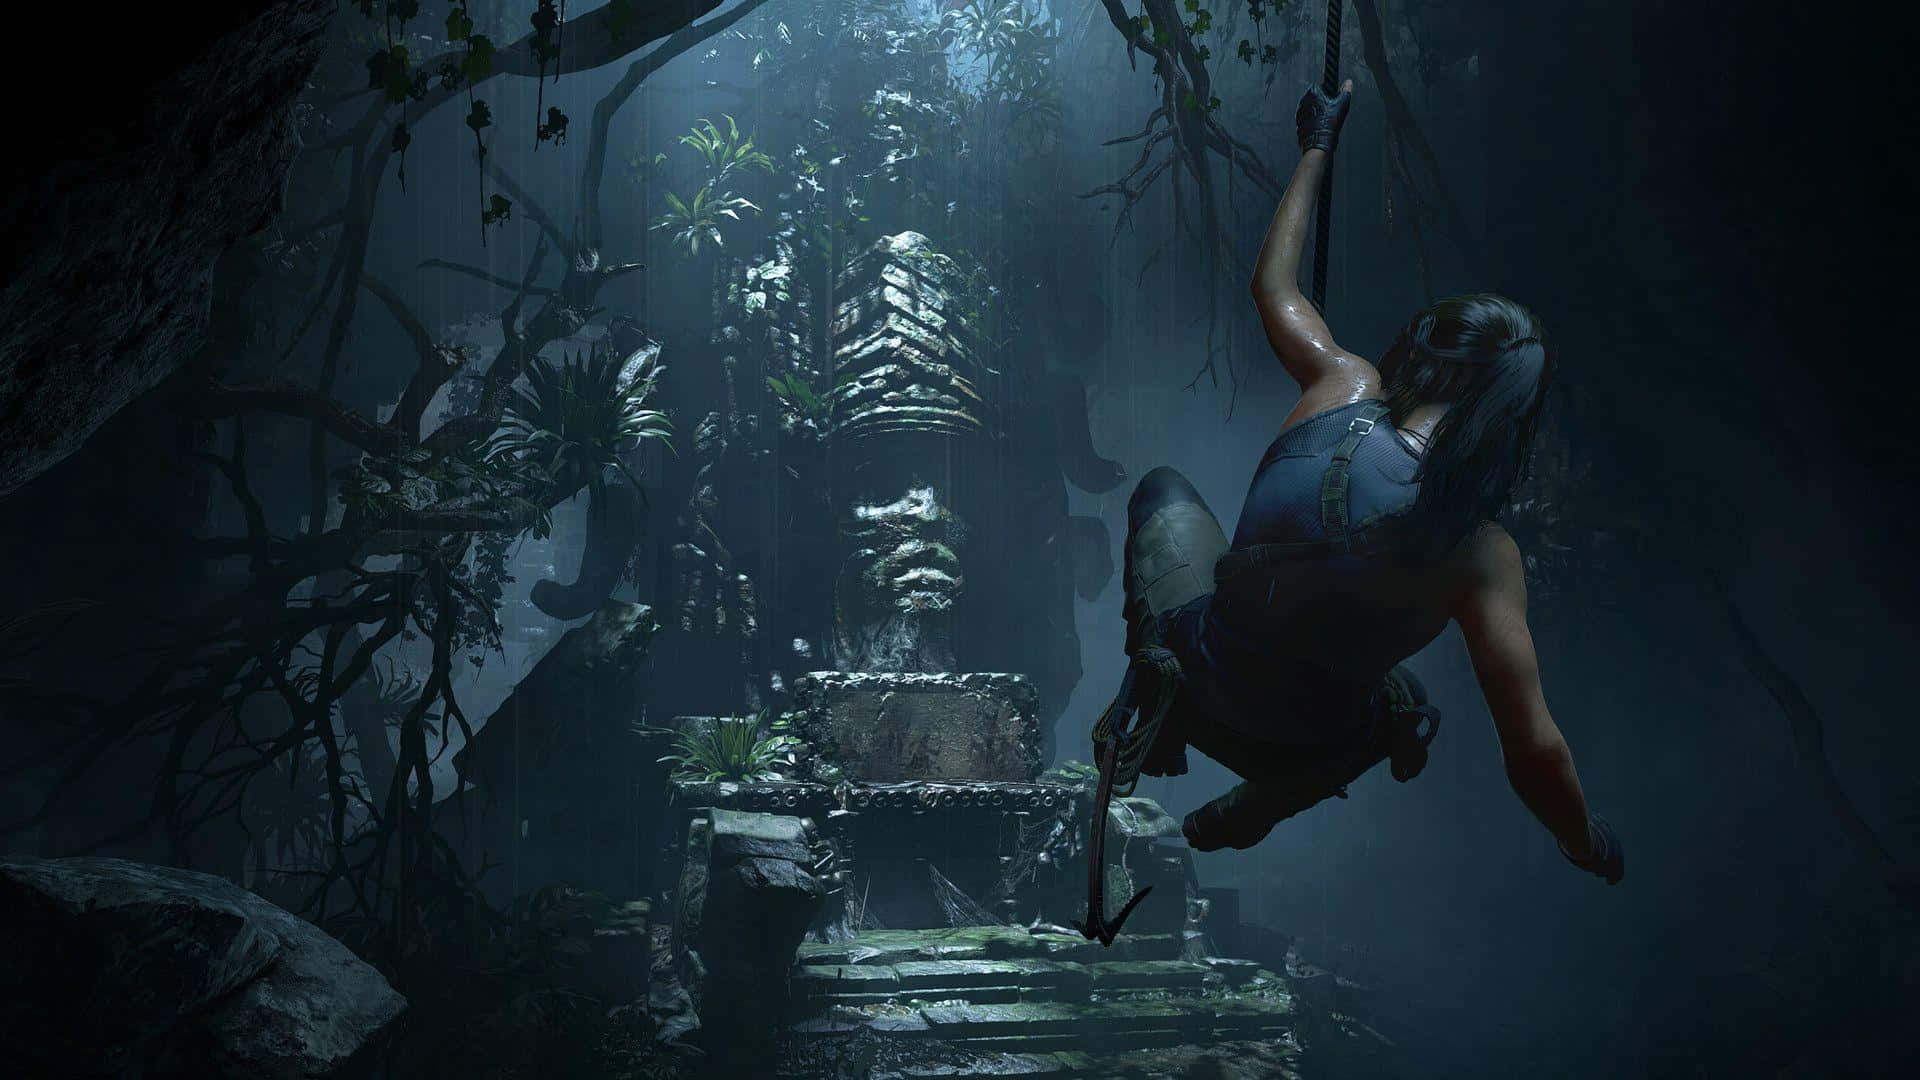 Lara Croft in action in the critically acclaimed Shadow of the Tomb Raider